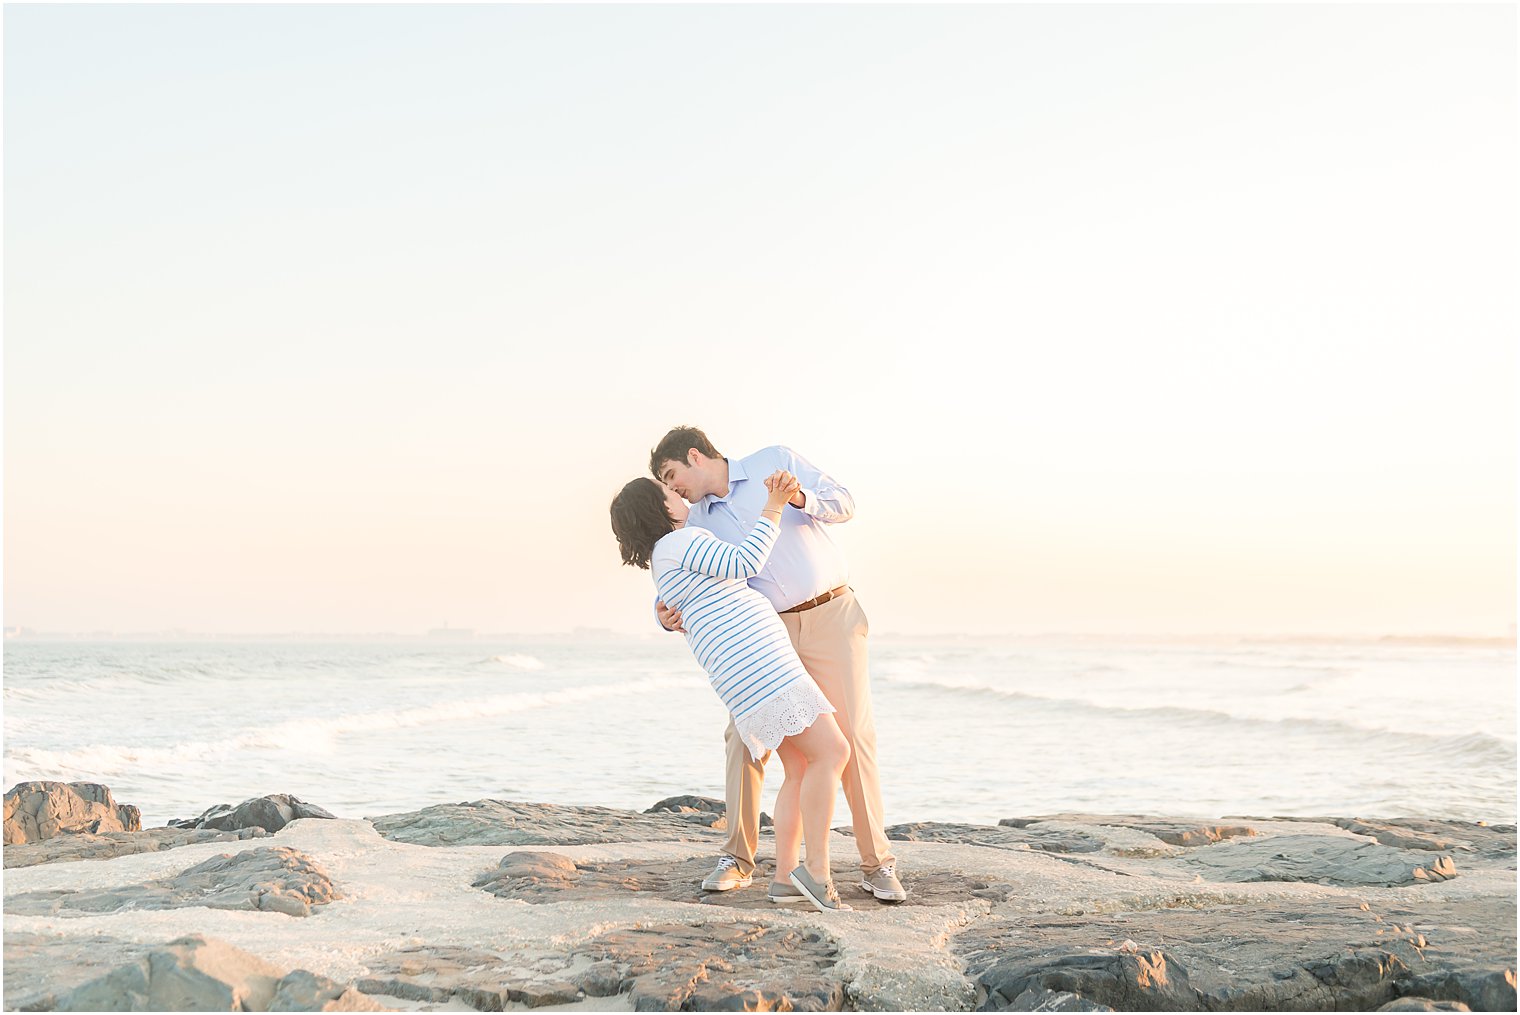 groom kisses bride dipping her while standing on rocks during beach engagement session in Avalon NJ